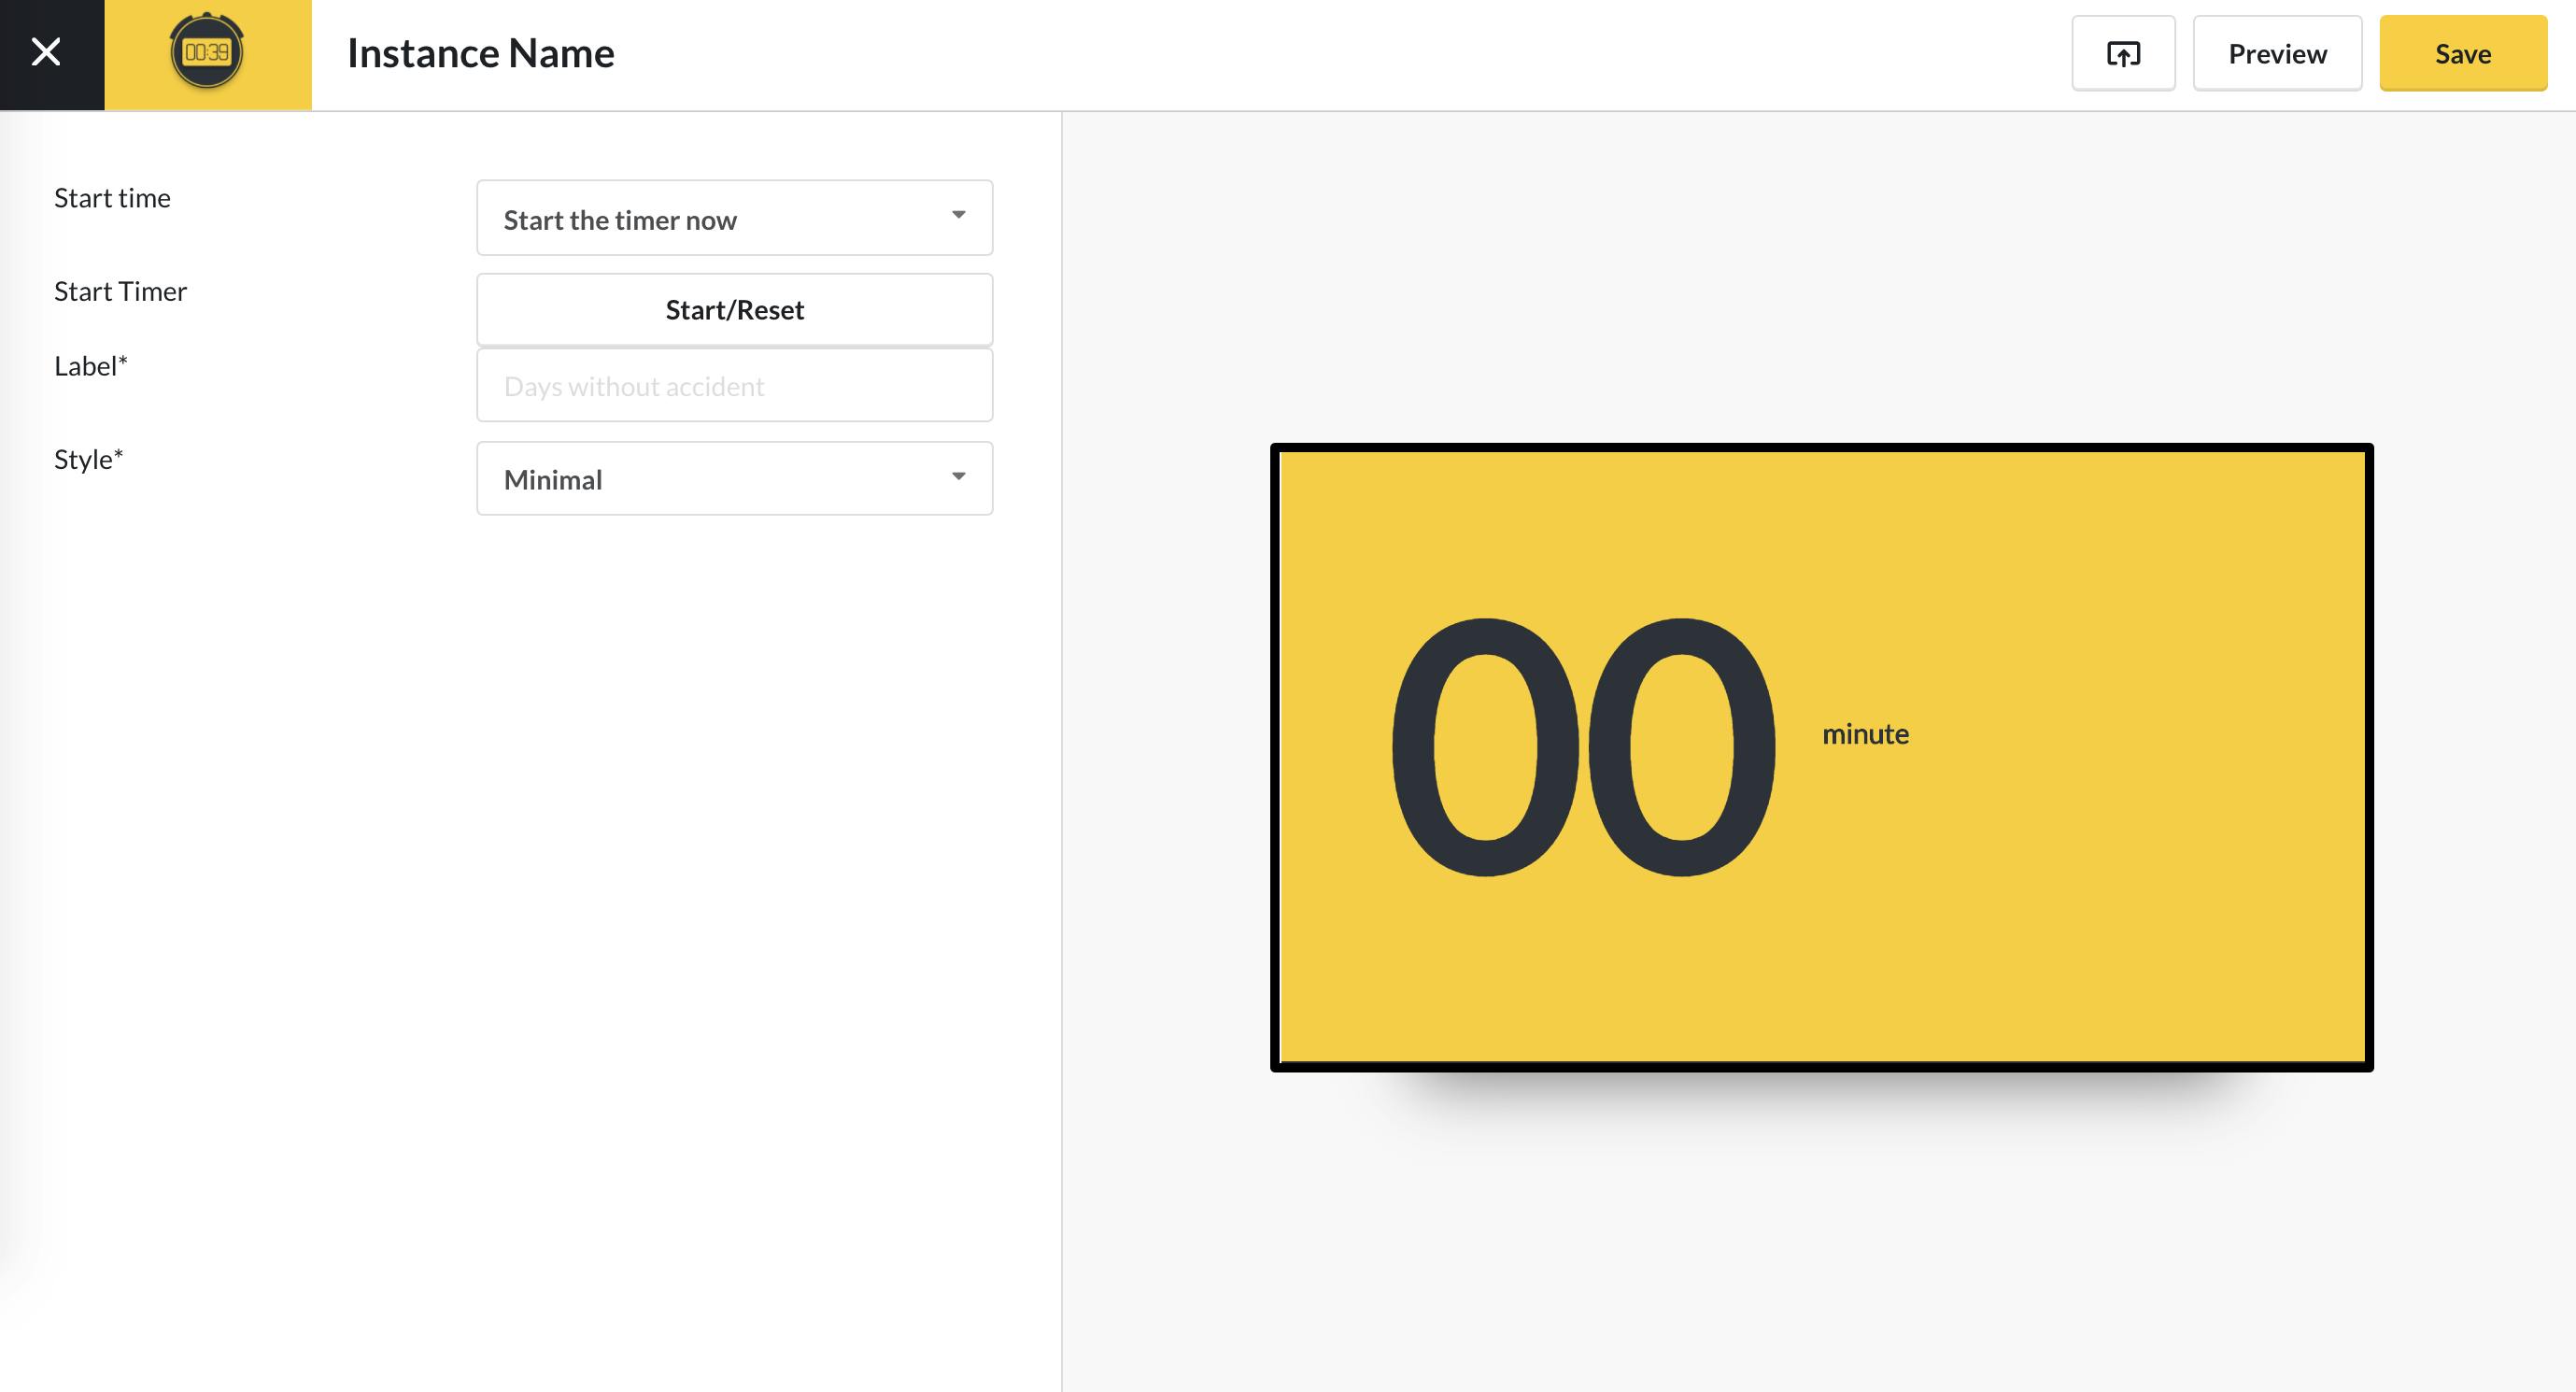 Count Up Timer App Guide - Minimal 5.13.2020.png
